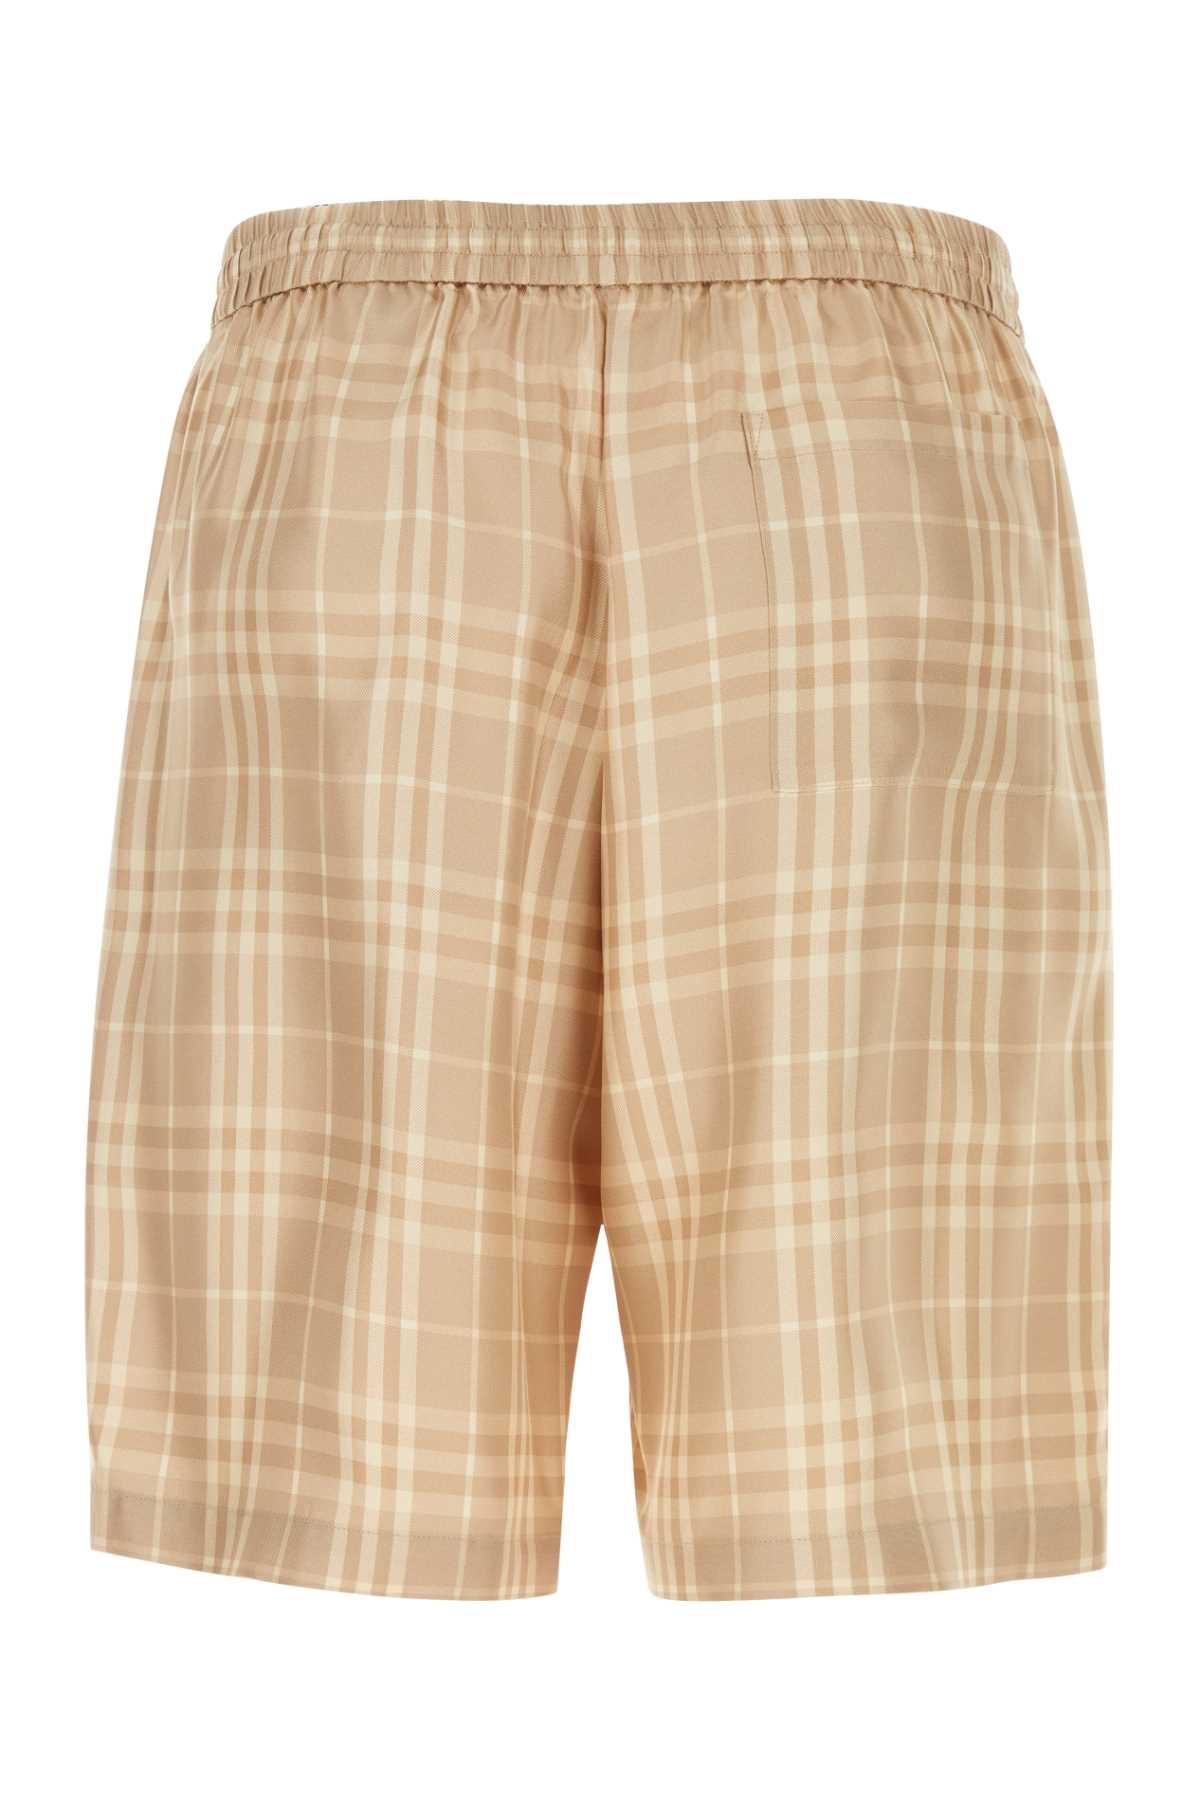 Burberry Embroidered Twill Bermuda Shorts In Softfawnipchck